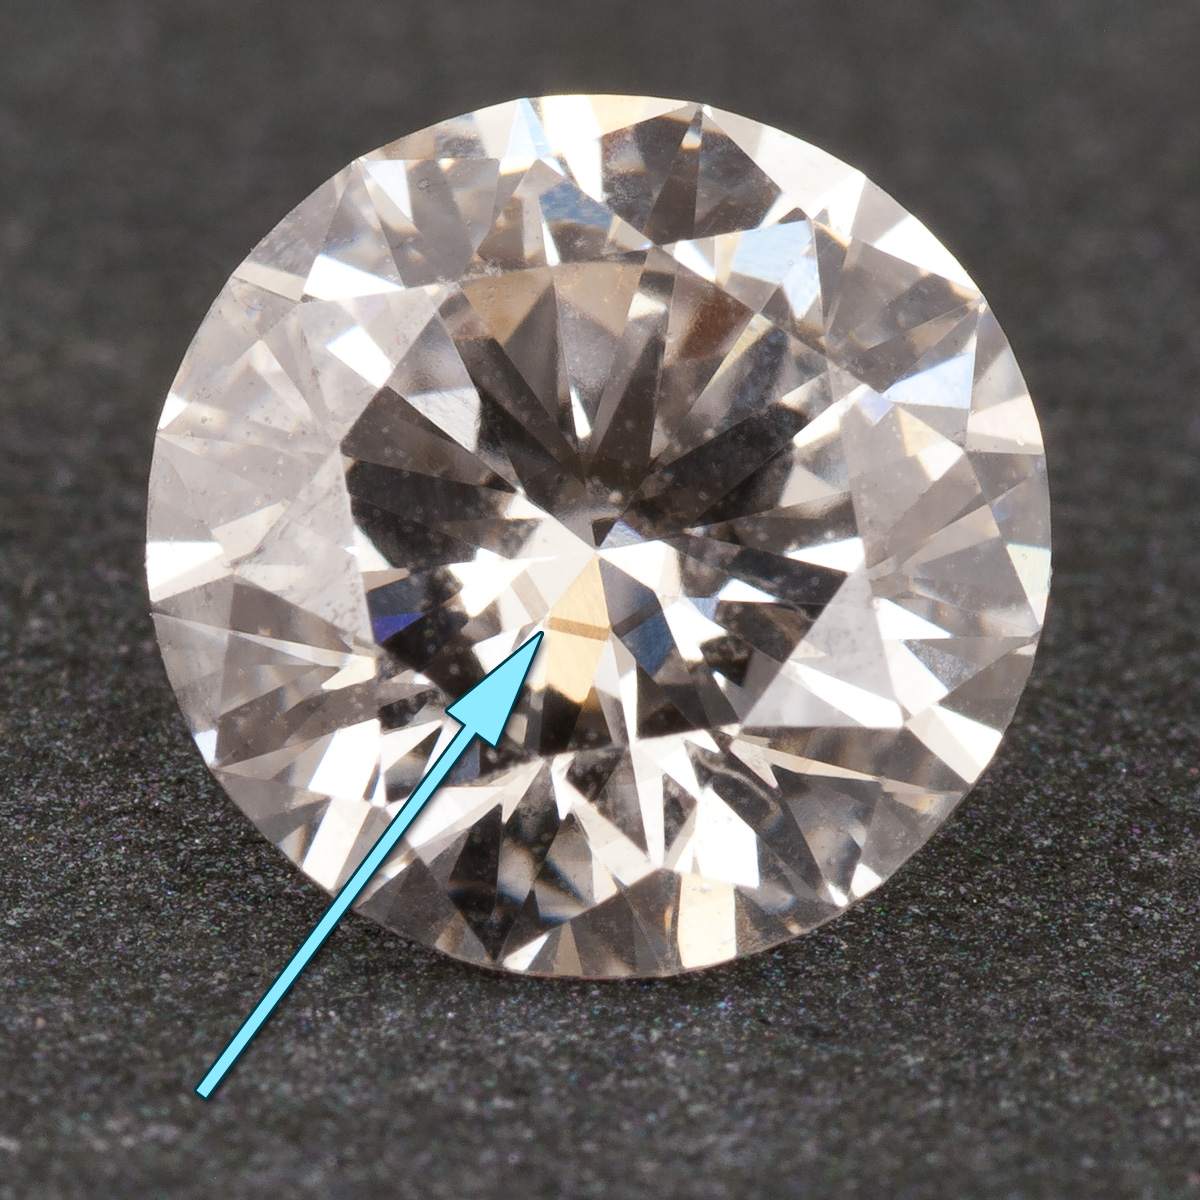 How to make synthetic diamonds